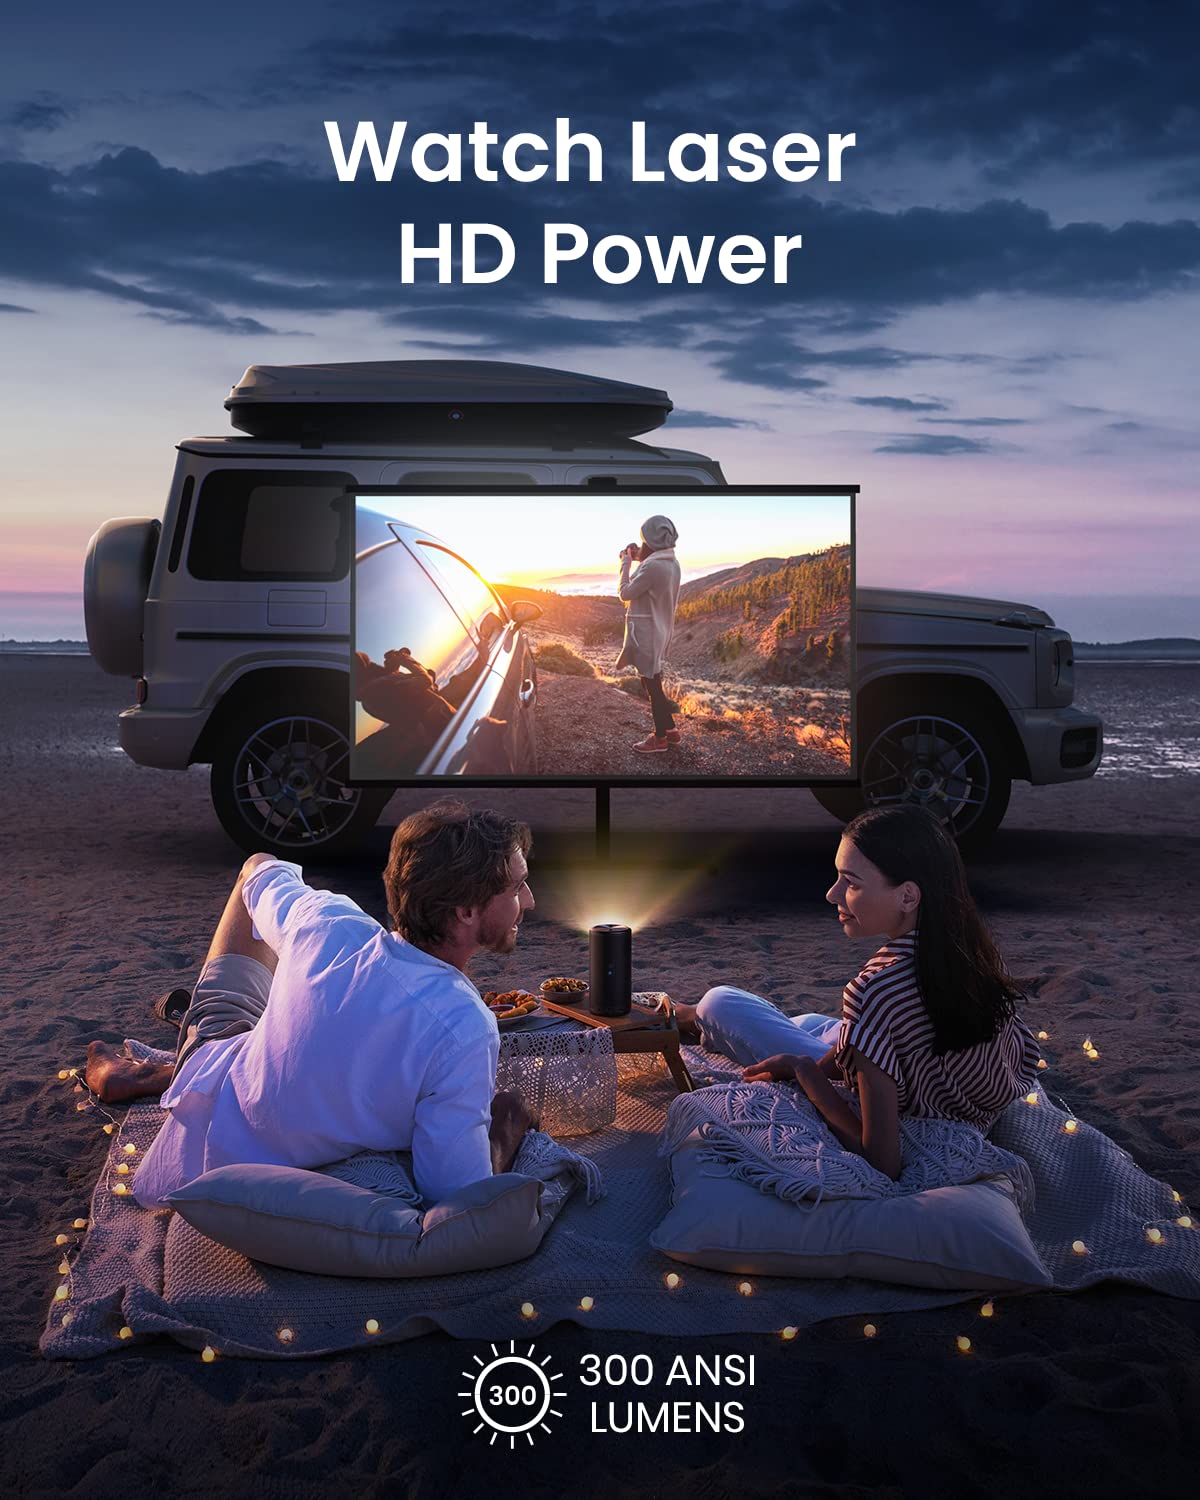 NEBULA Anker Capsule 3 Laser 1080p, Mini Smart projector with wifi and bluetooth, Outdoor Portable Projector, Dolby Digital, Laser Projector, Autofocus, 120-Inch Picture, 2.5 Hours Built-in Battery